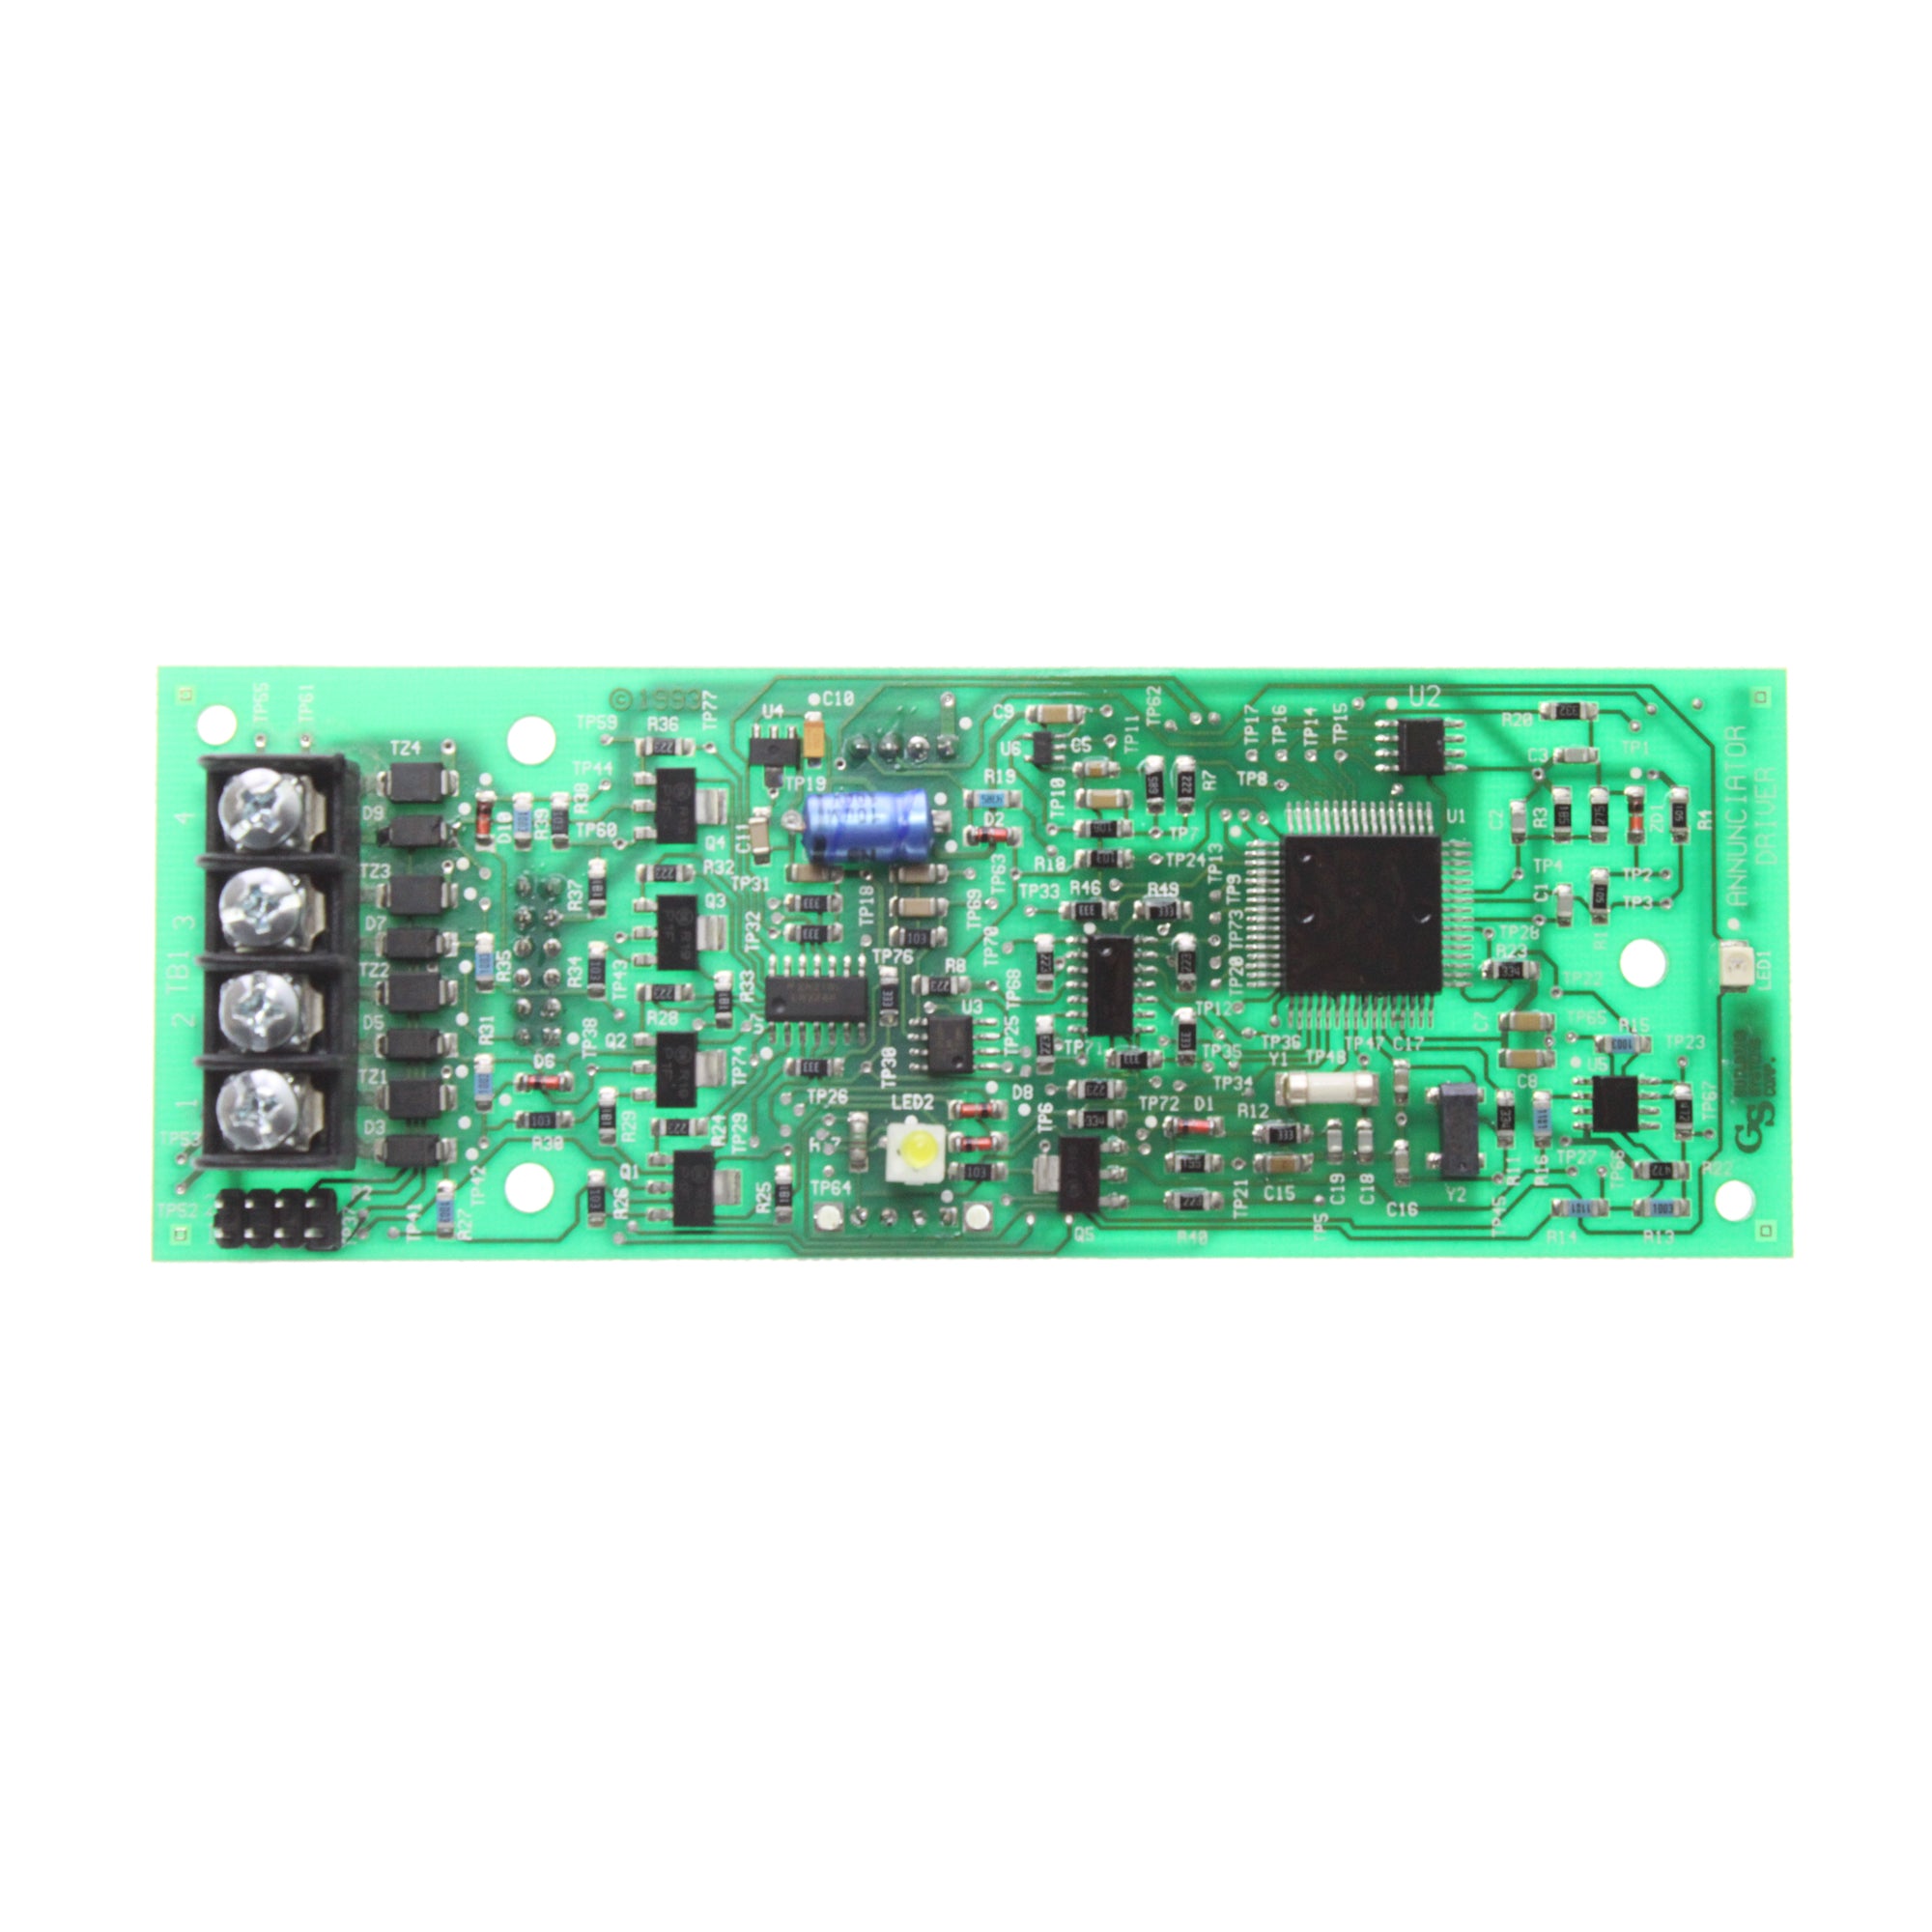 Edwards System Technologies (EST), EST ADMM ANNUNCIATOR DRIVER MASTER MODULE SIGNAL SUB ASSEMBLY